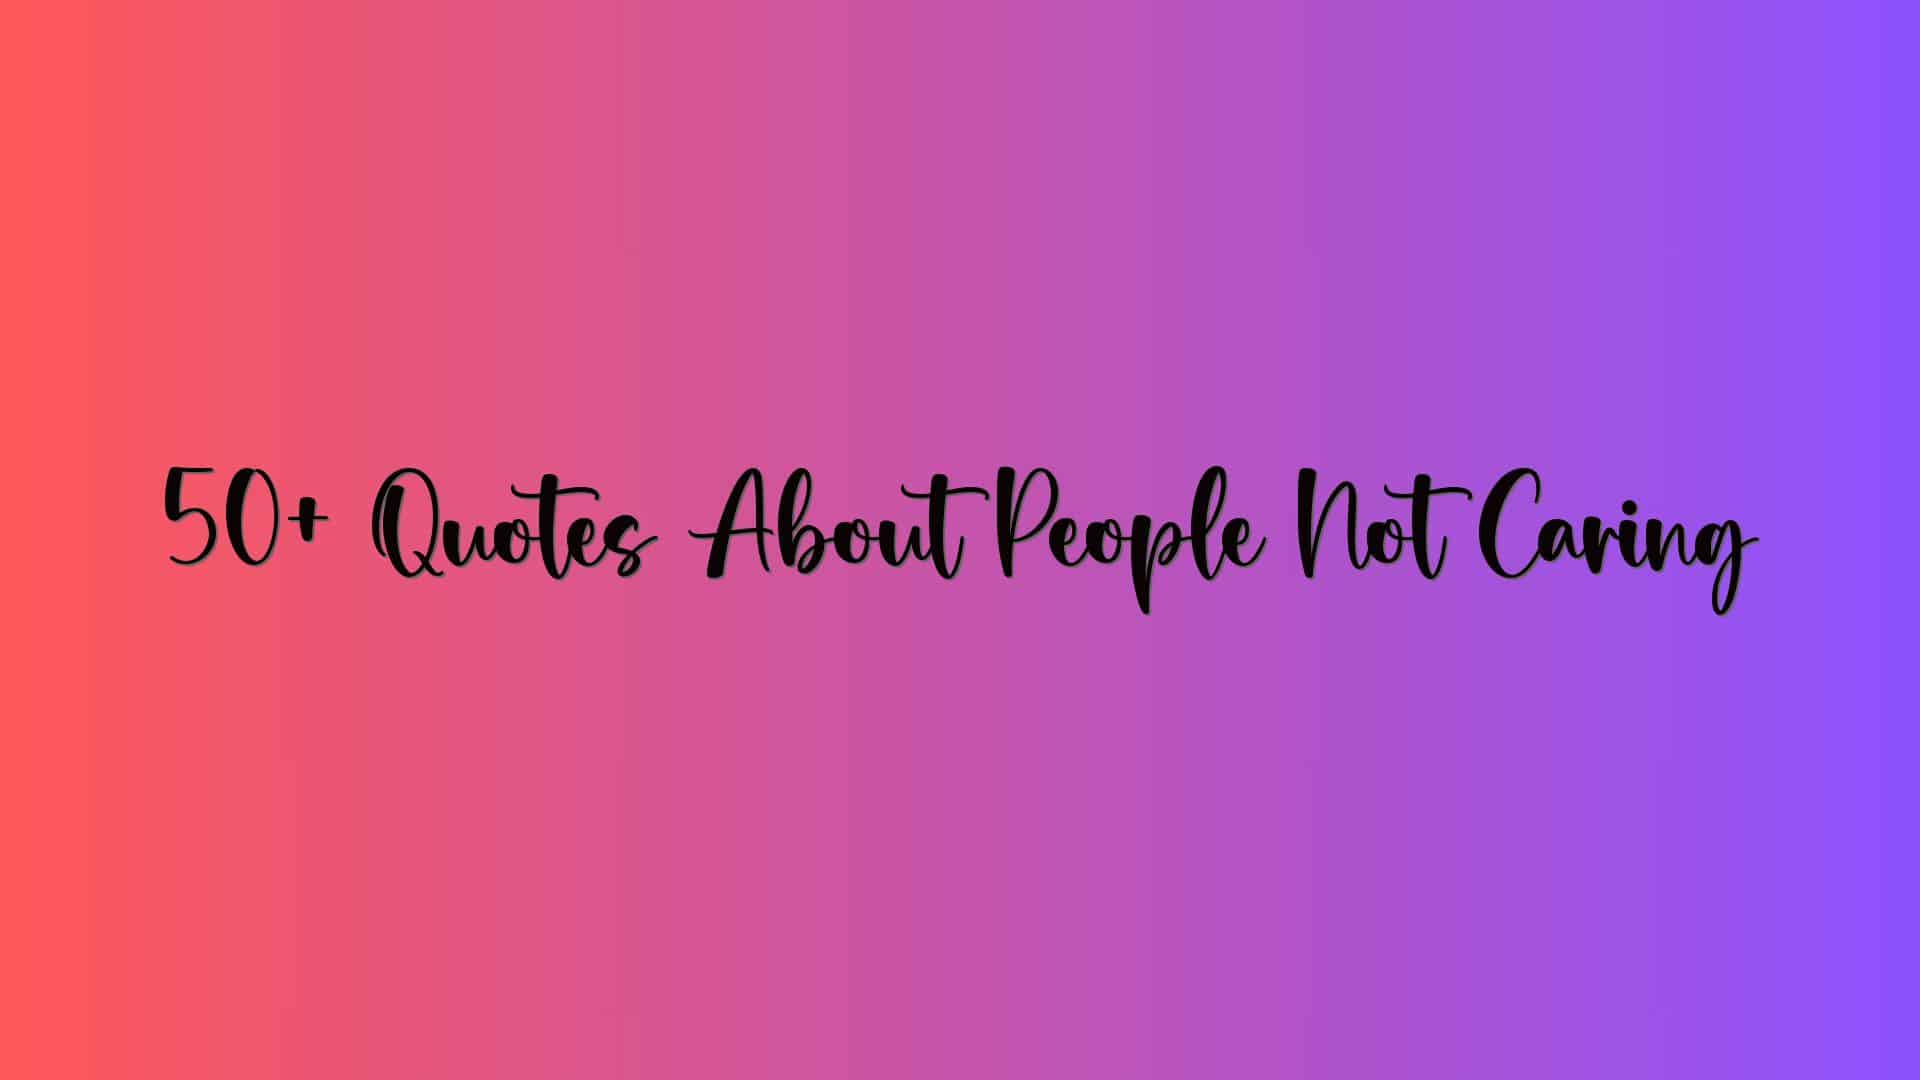 50+ Quotes About People Not Caring